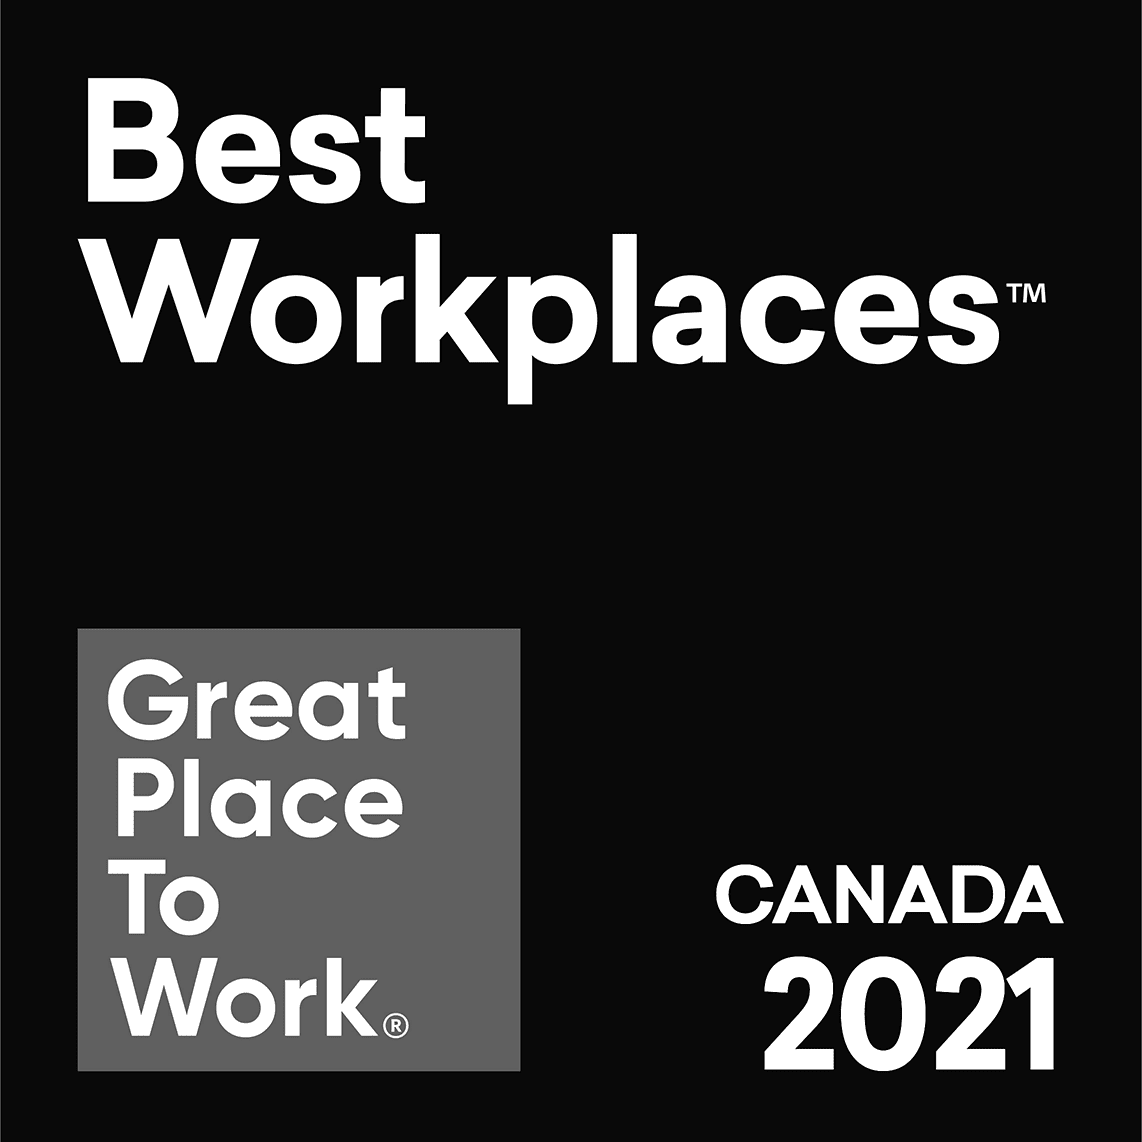 Best Workplaces in Canada 2021